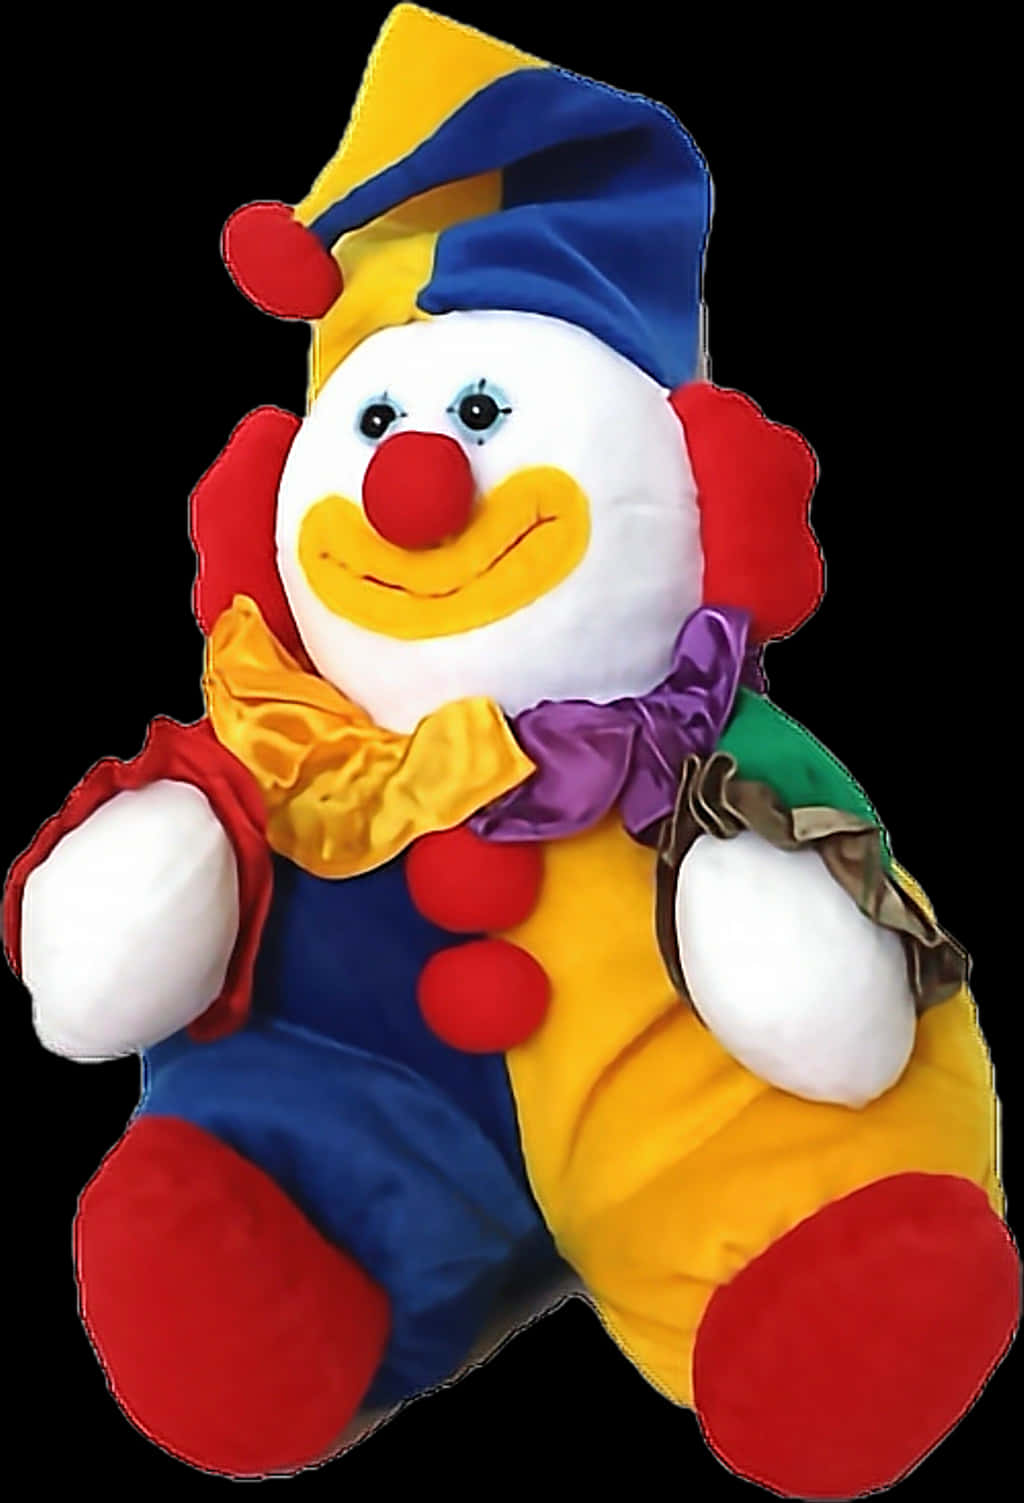 Colorful Clown Dollwith Red Nose.jpg PNG